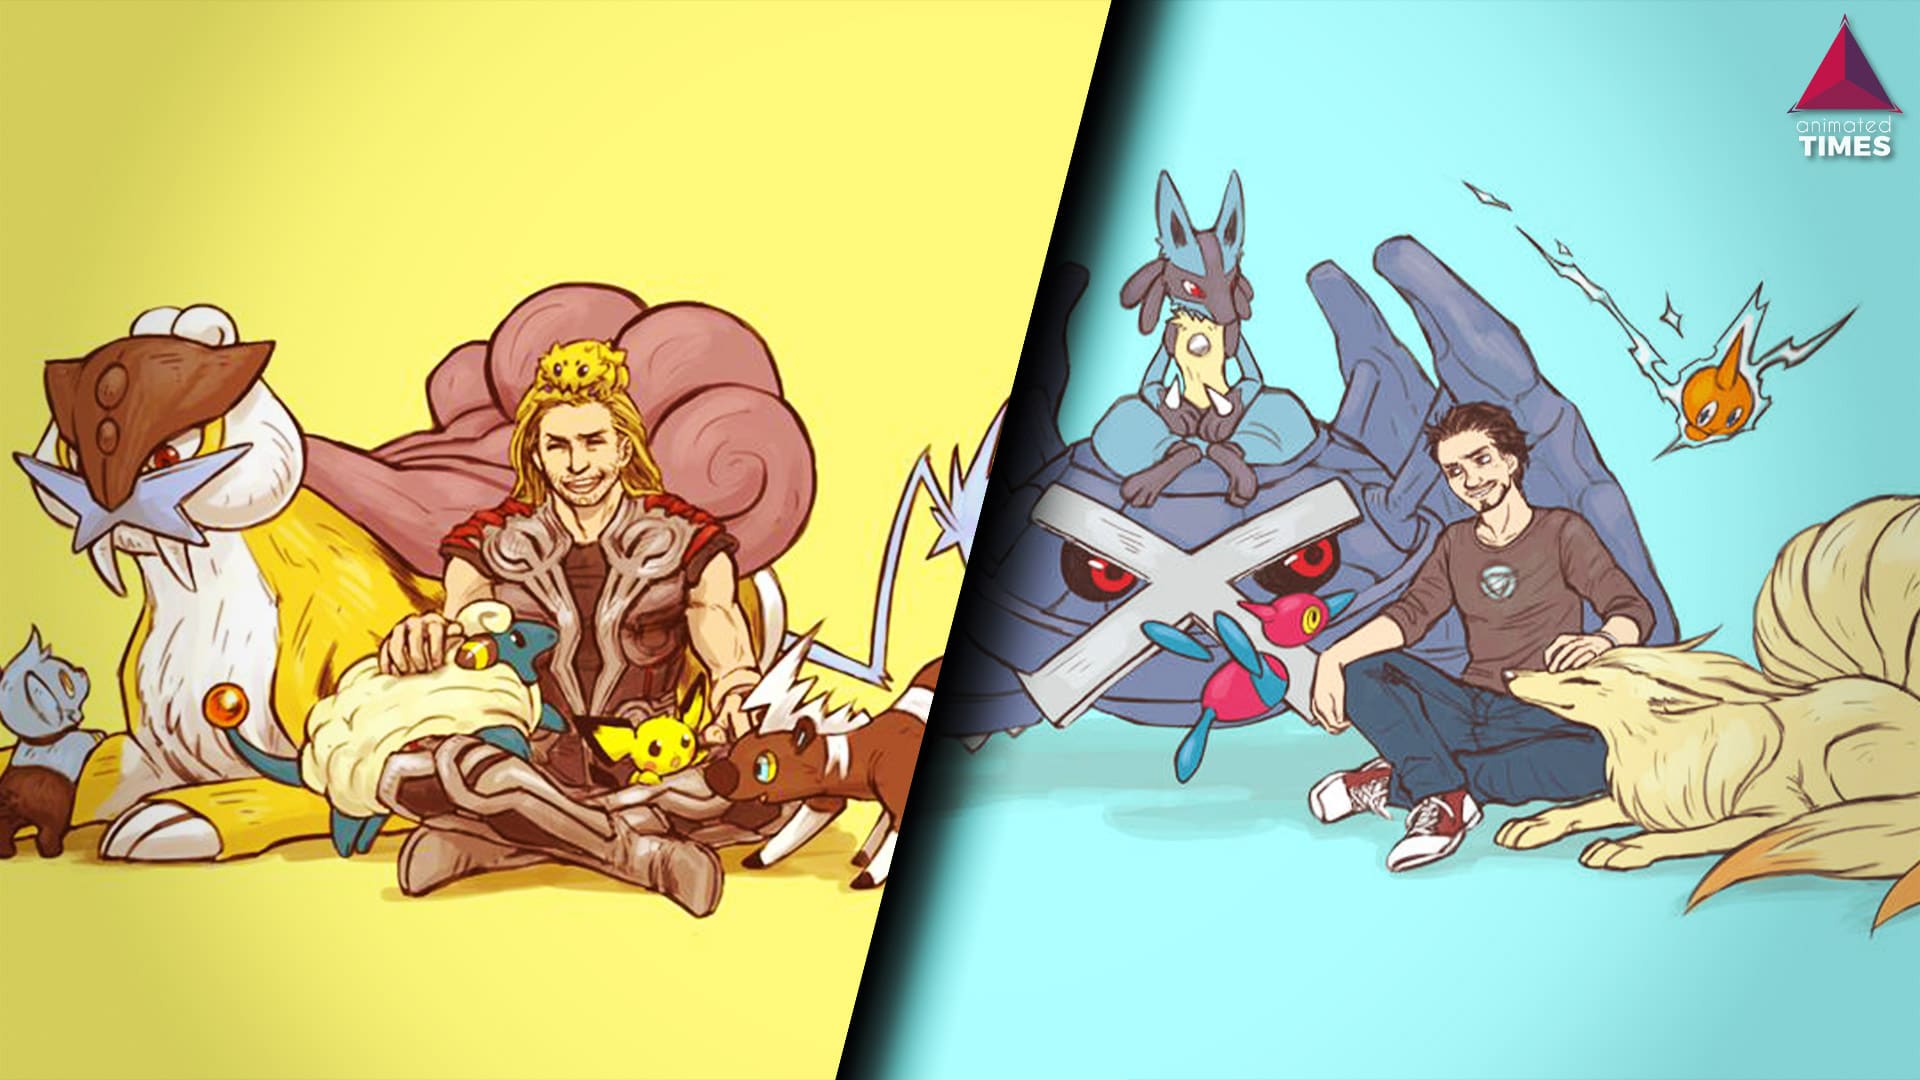 13 Pics Of The Avengers Drawn As Pokemon Trainers